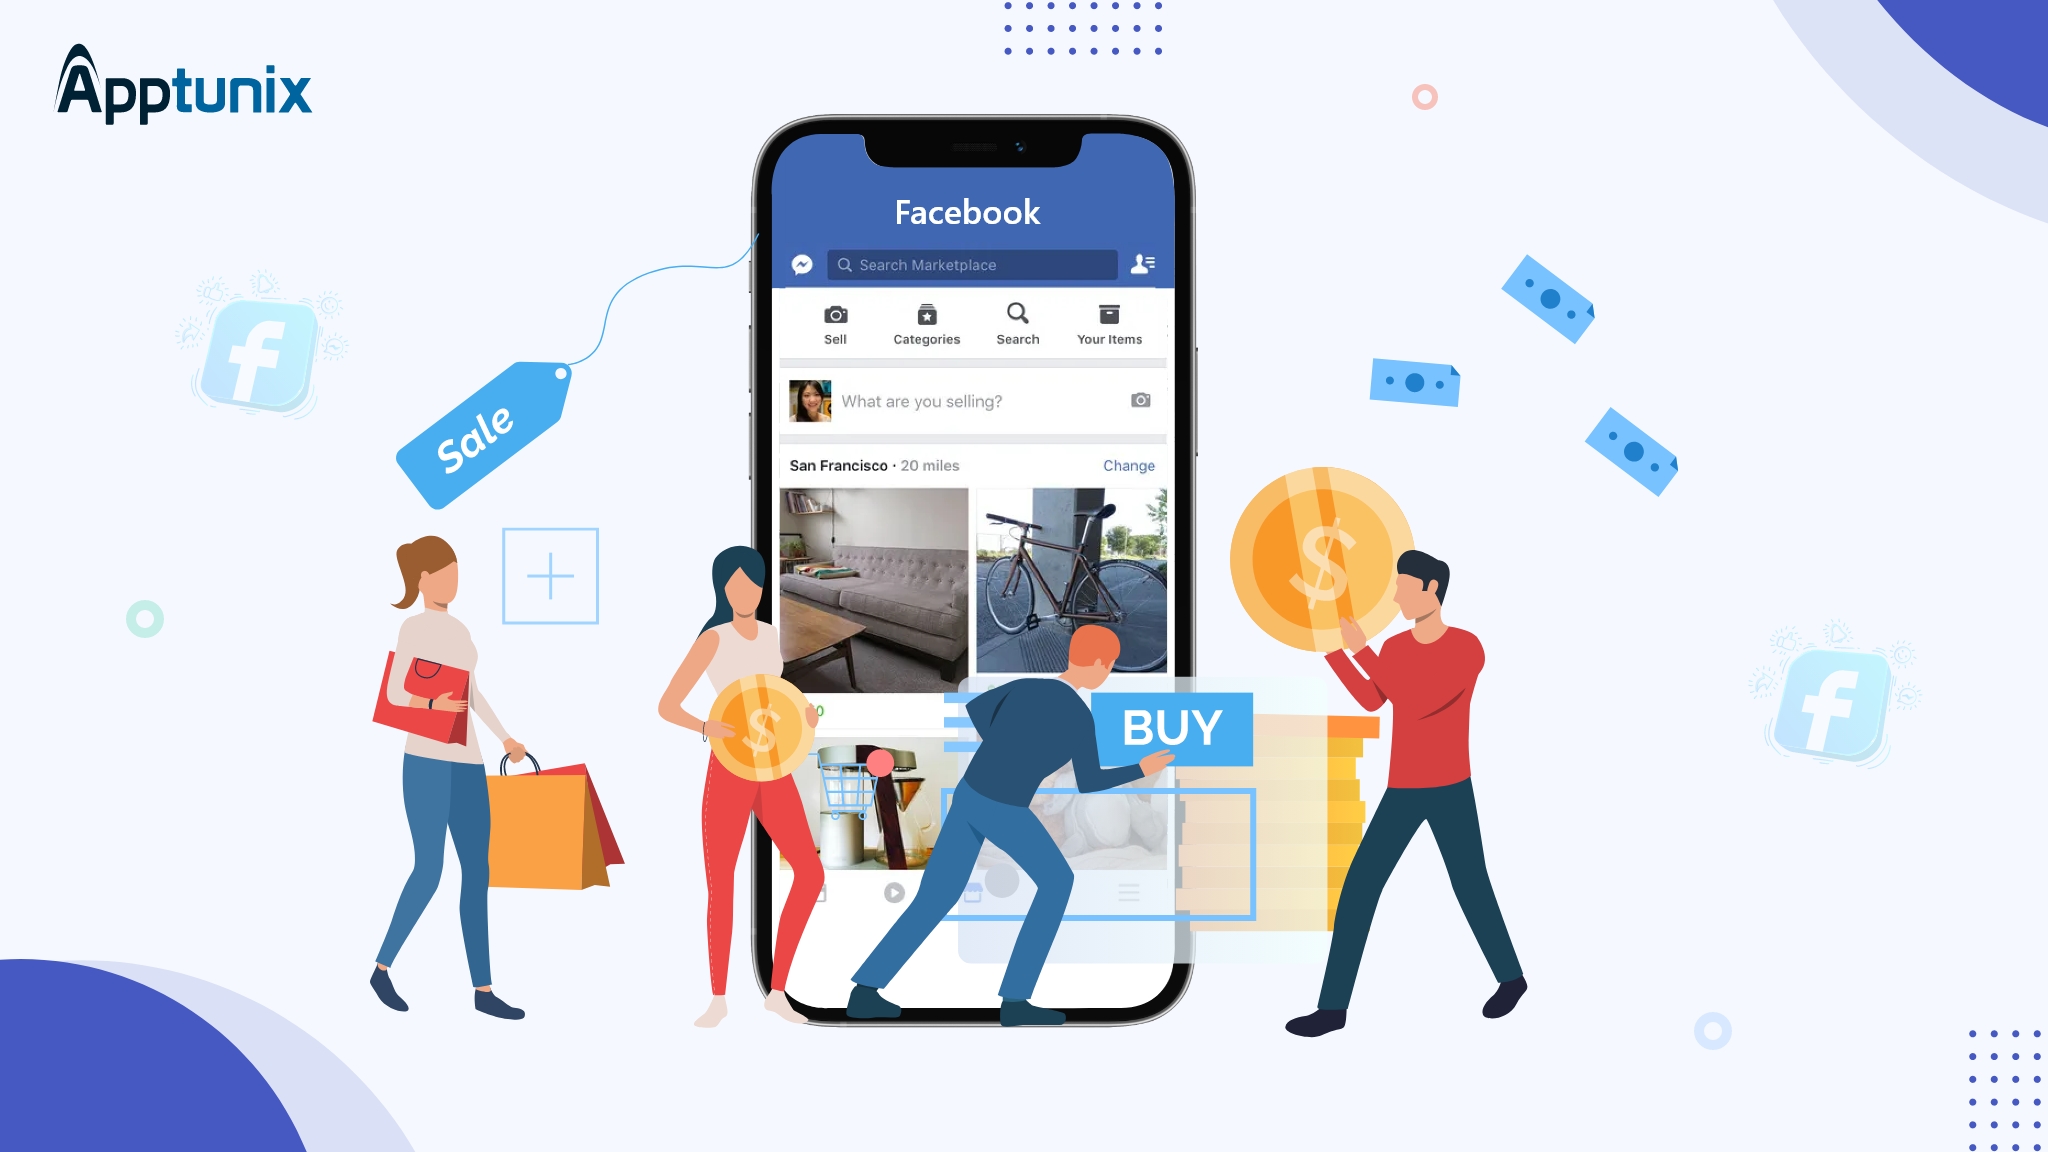 Facebook Like Marketplace App Development: How Much Does it Cost?